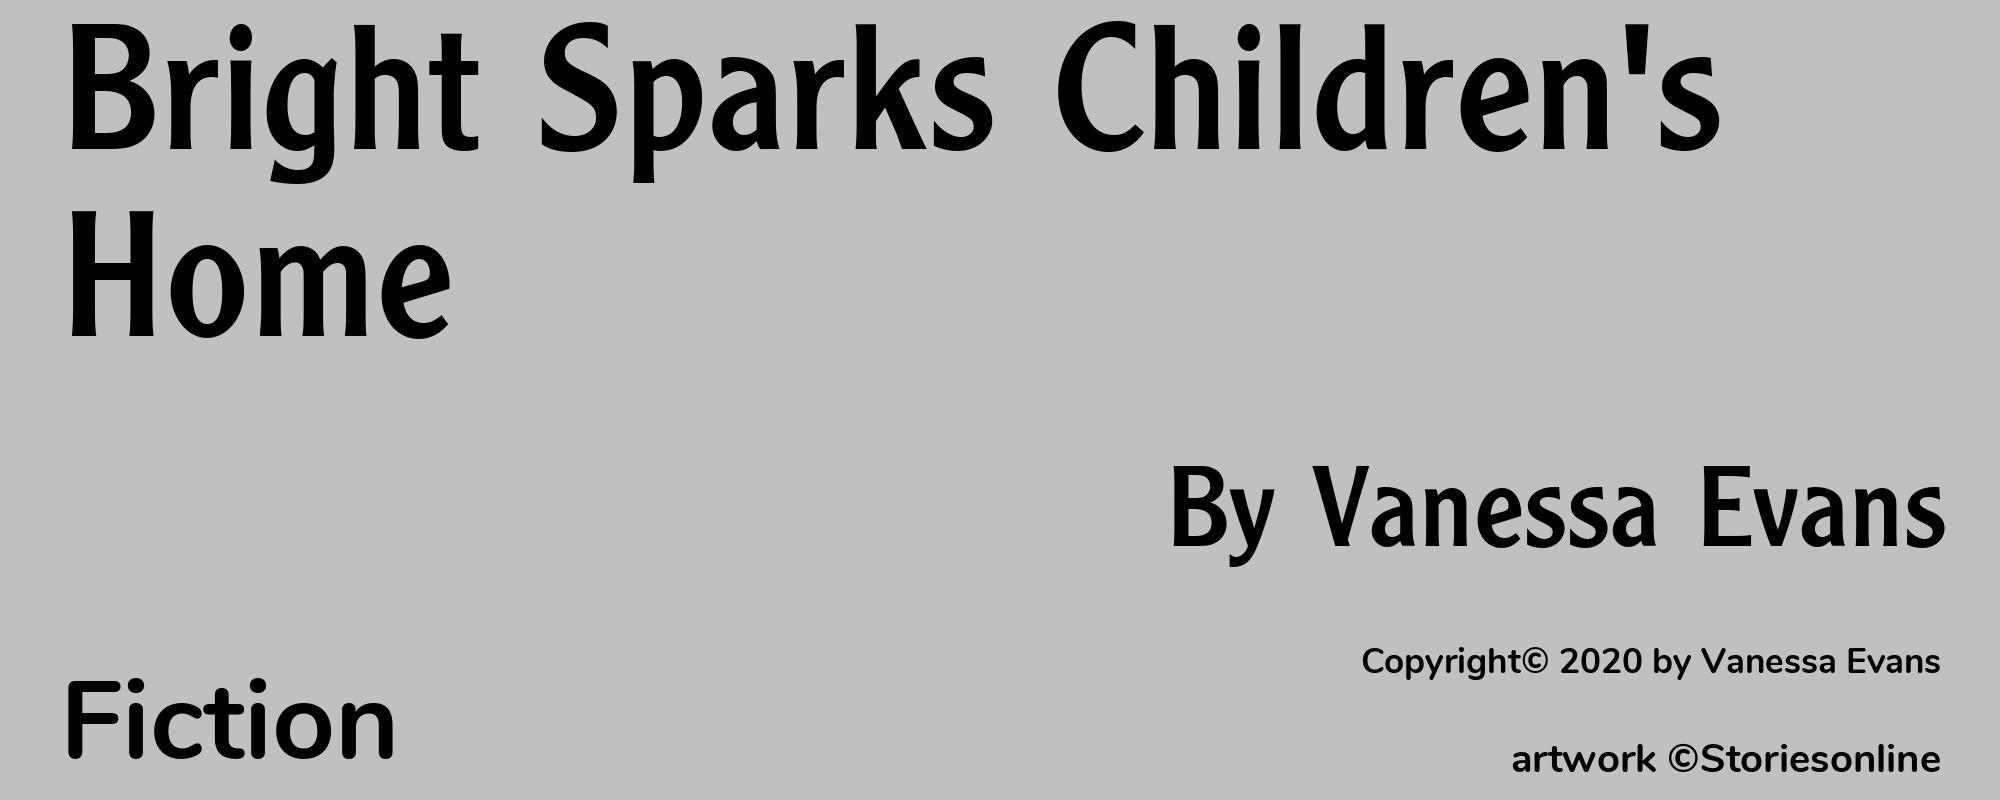 Bright Sparks Children's Home - Cover